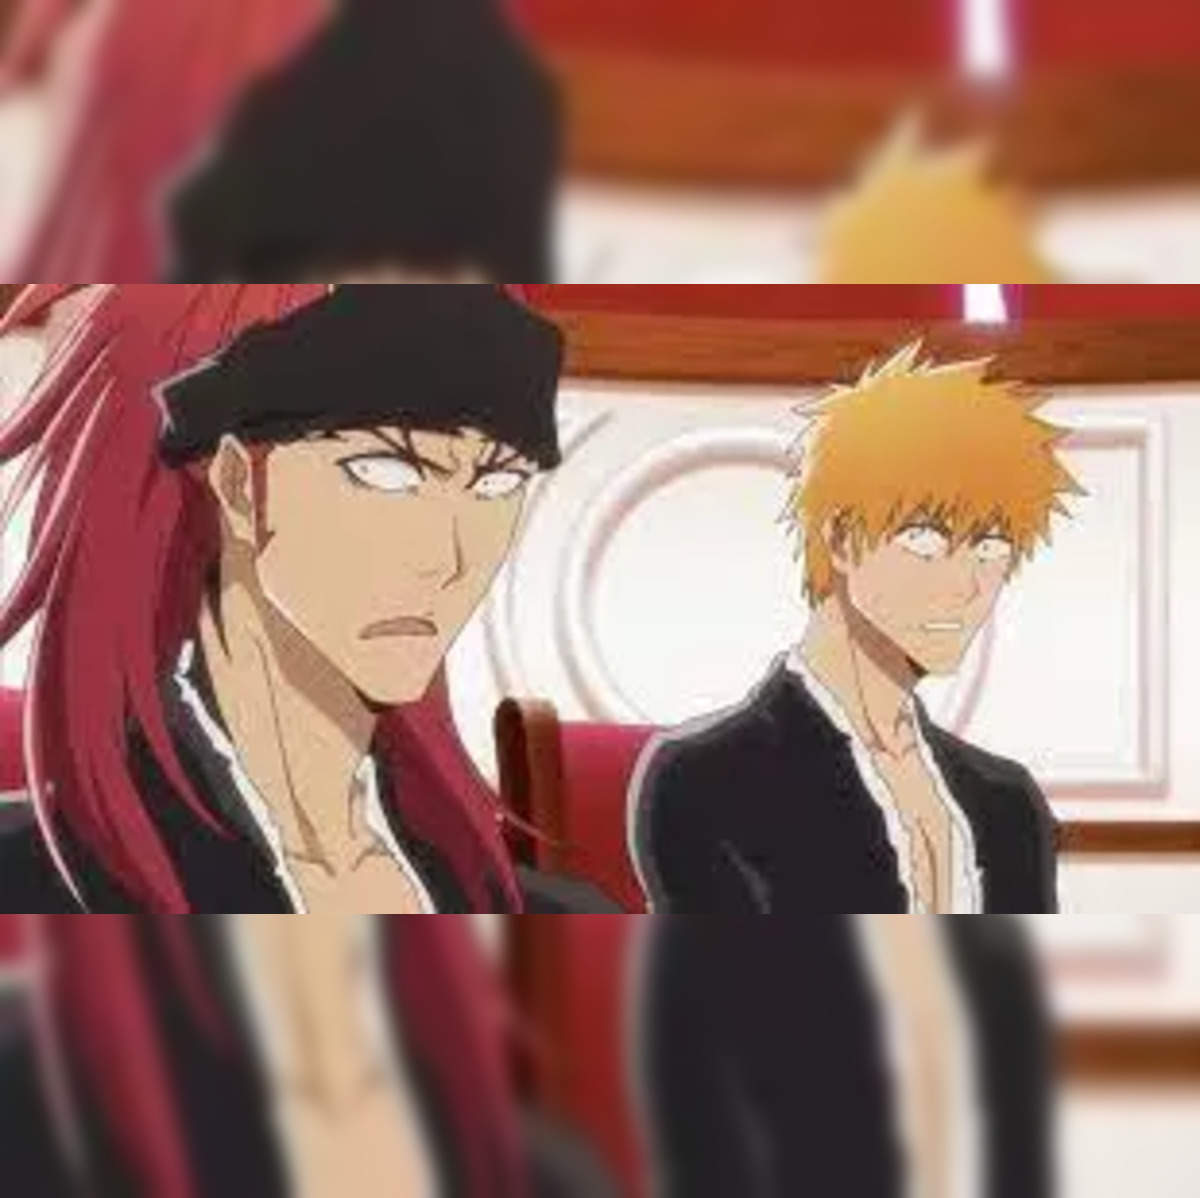 bleach: Bleach TYBW 'The Battle': Know the release time, date